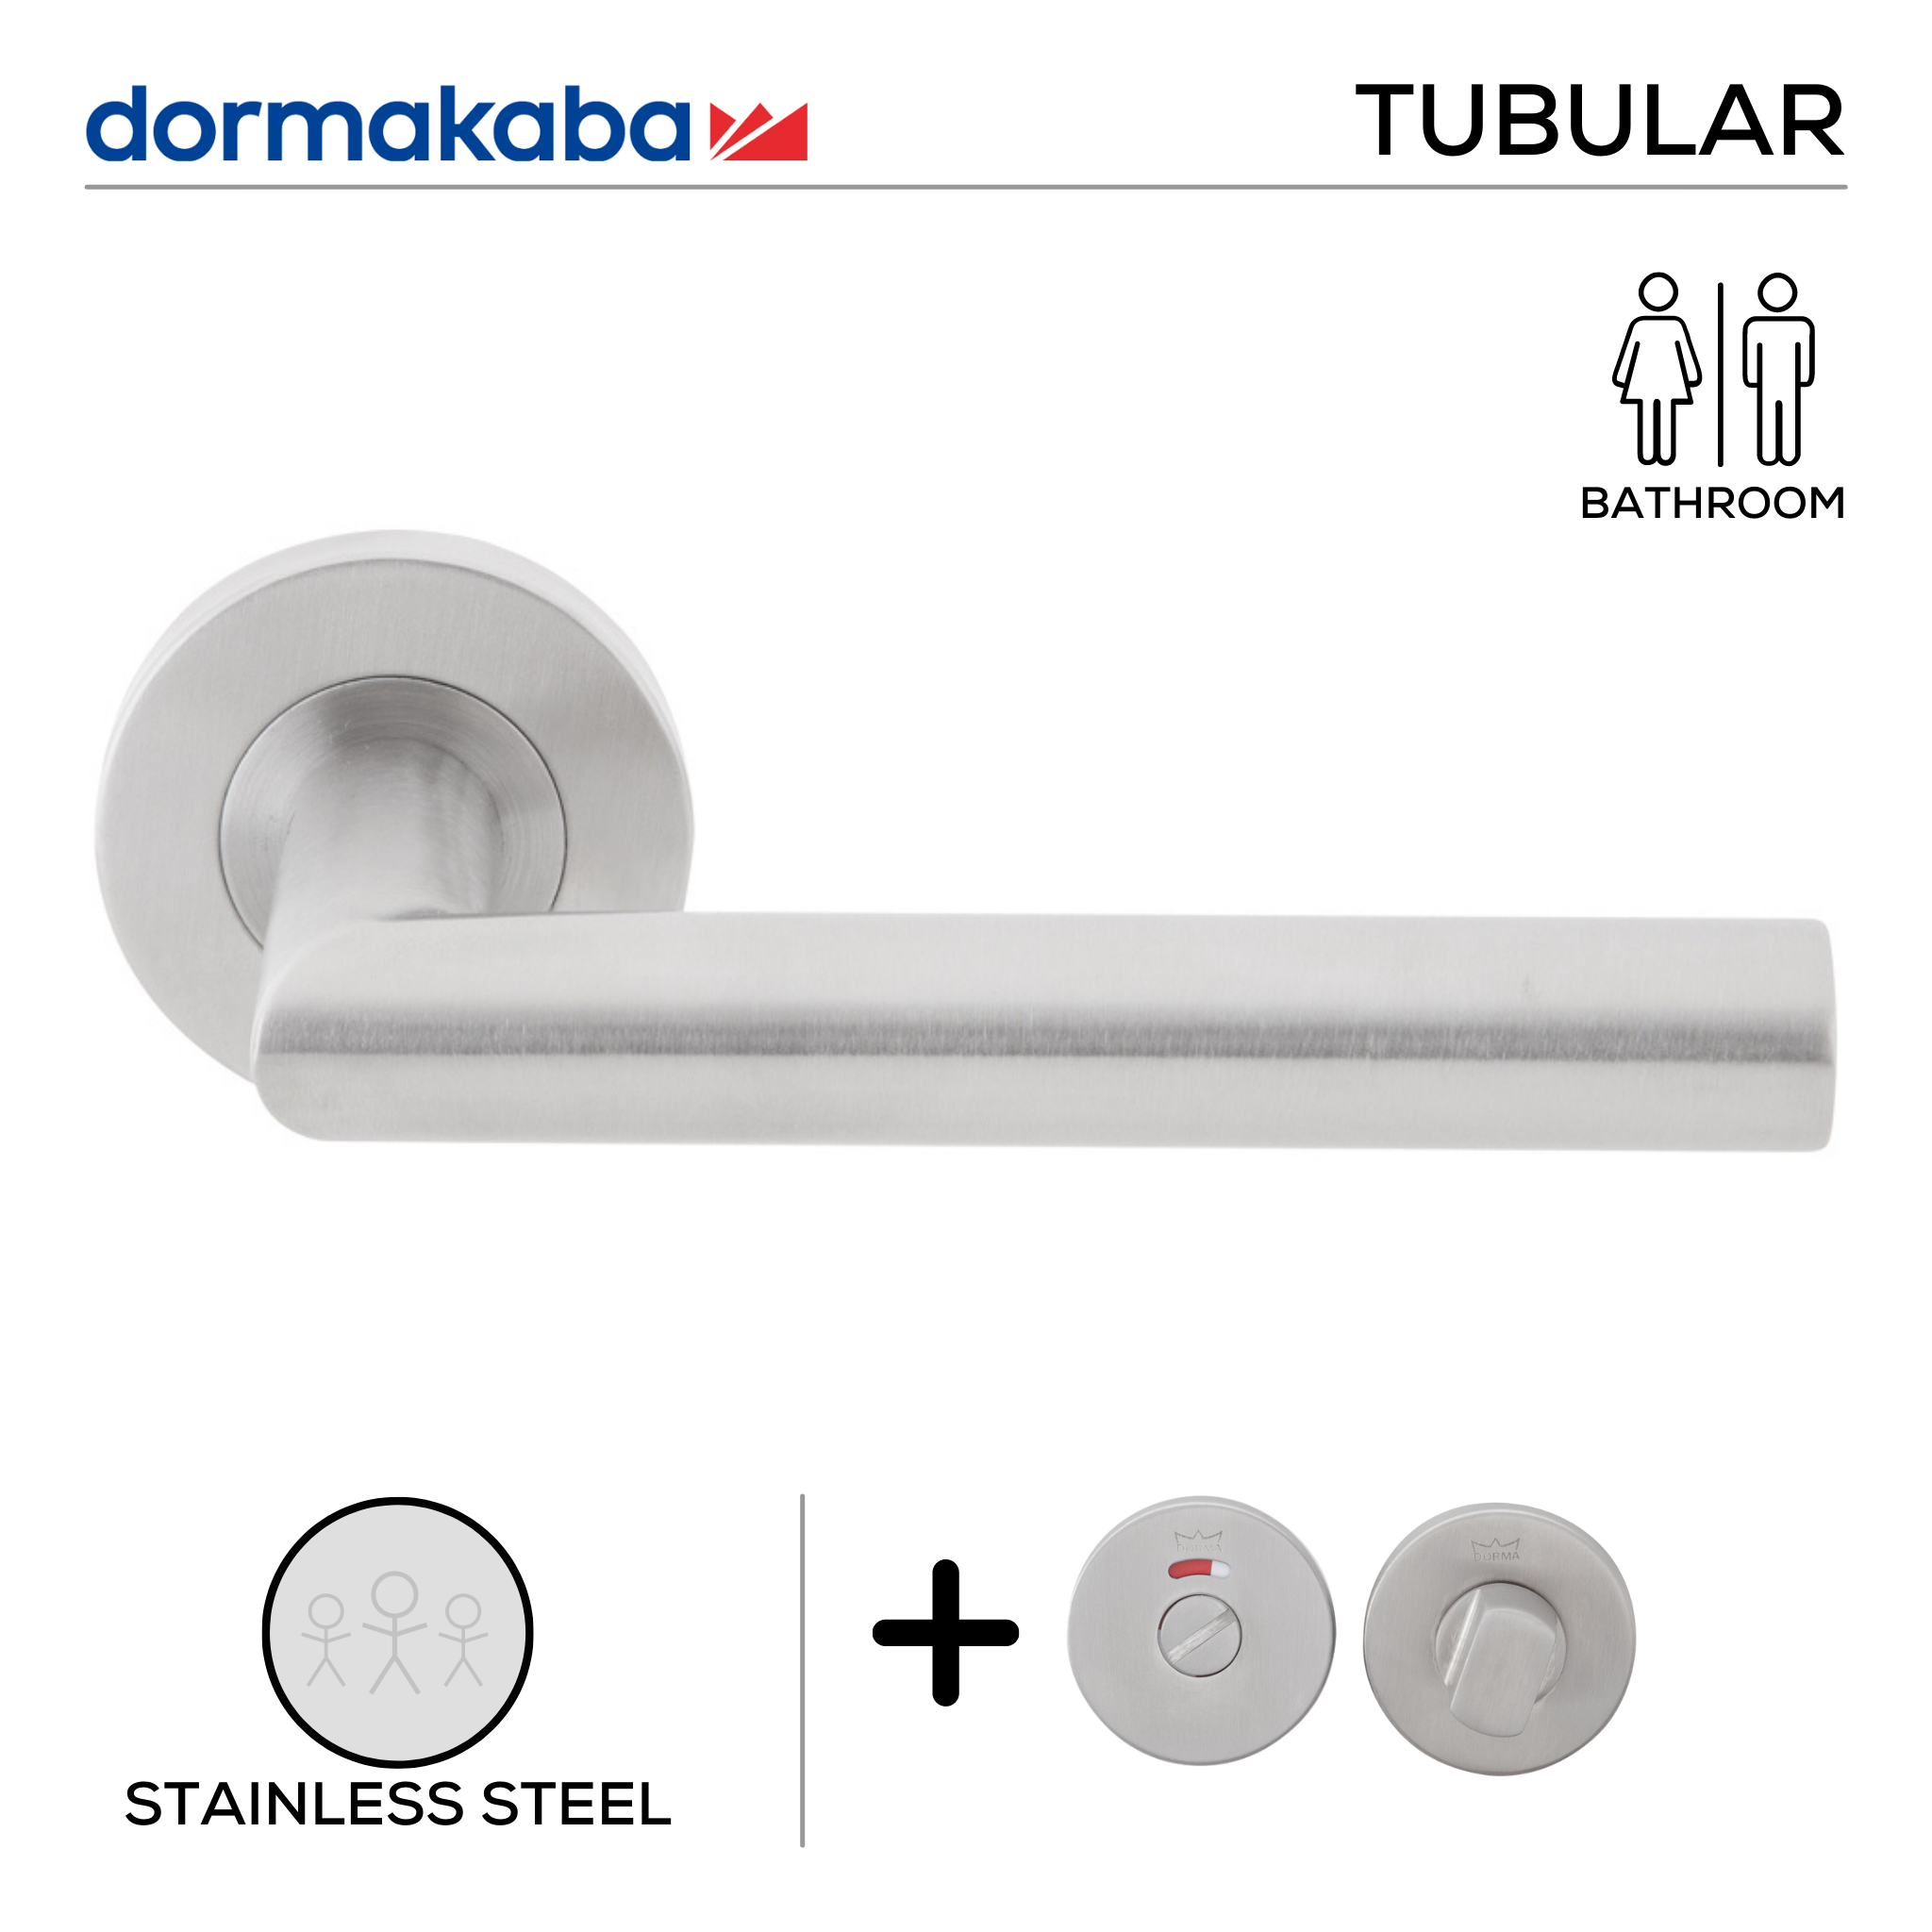 TH 125 Bathroom W/C, Lever Handles, Tubular, On Round Rose, With Bathroom (WC) Indicator Set - DWC 005, 143mm (l), Stainless Steel, DORMAKABA